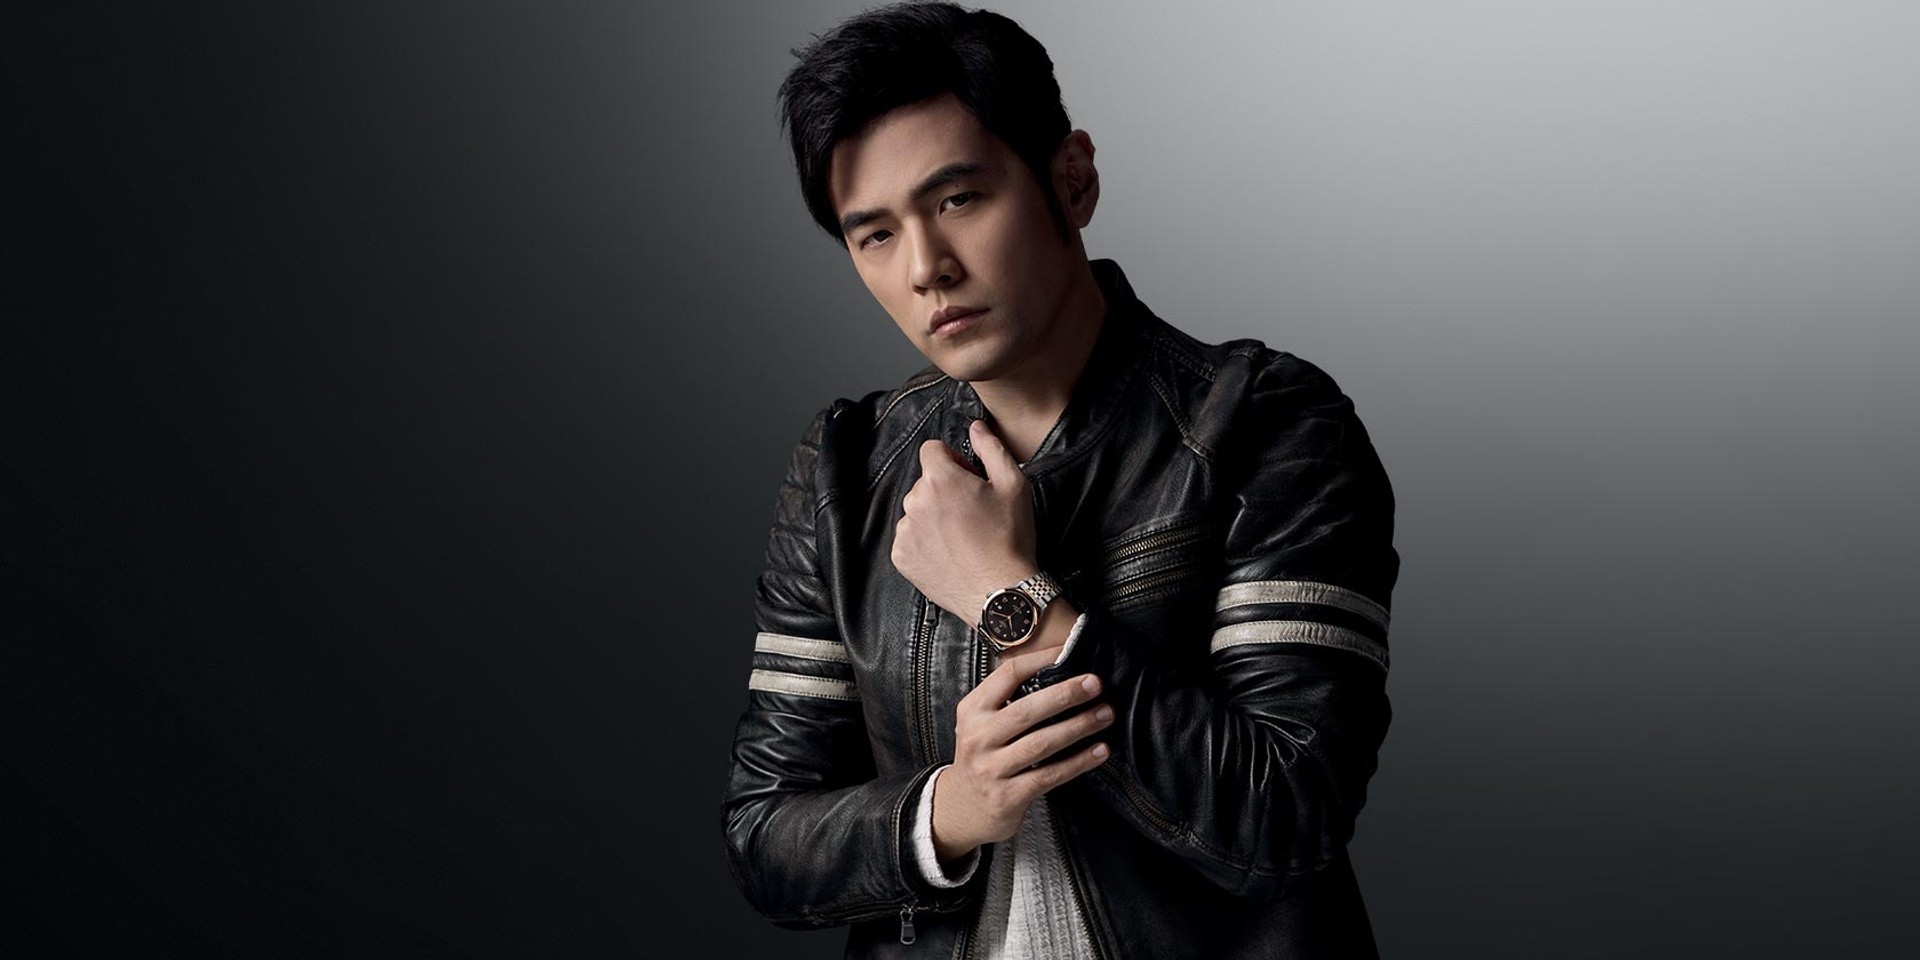 Jay Chou to perform in Singapore in 2020 